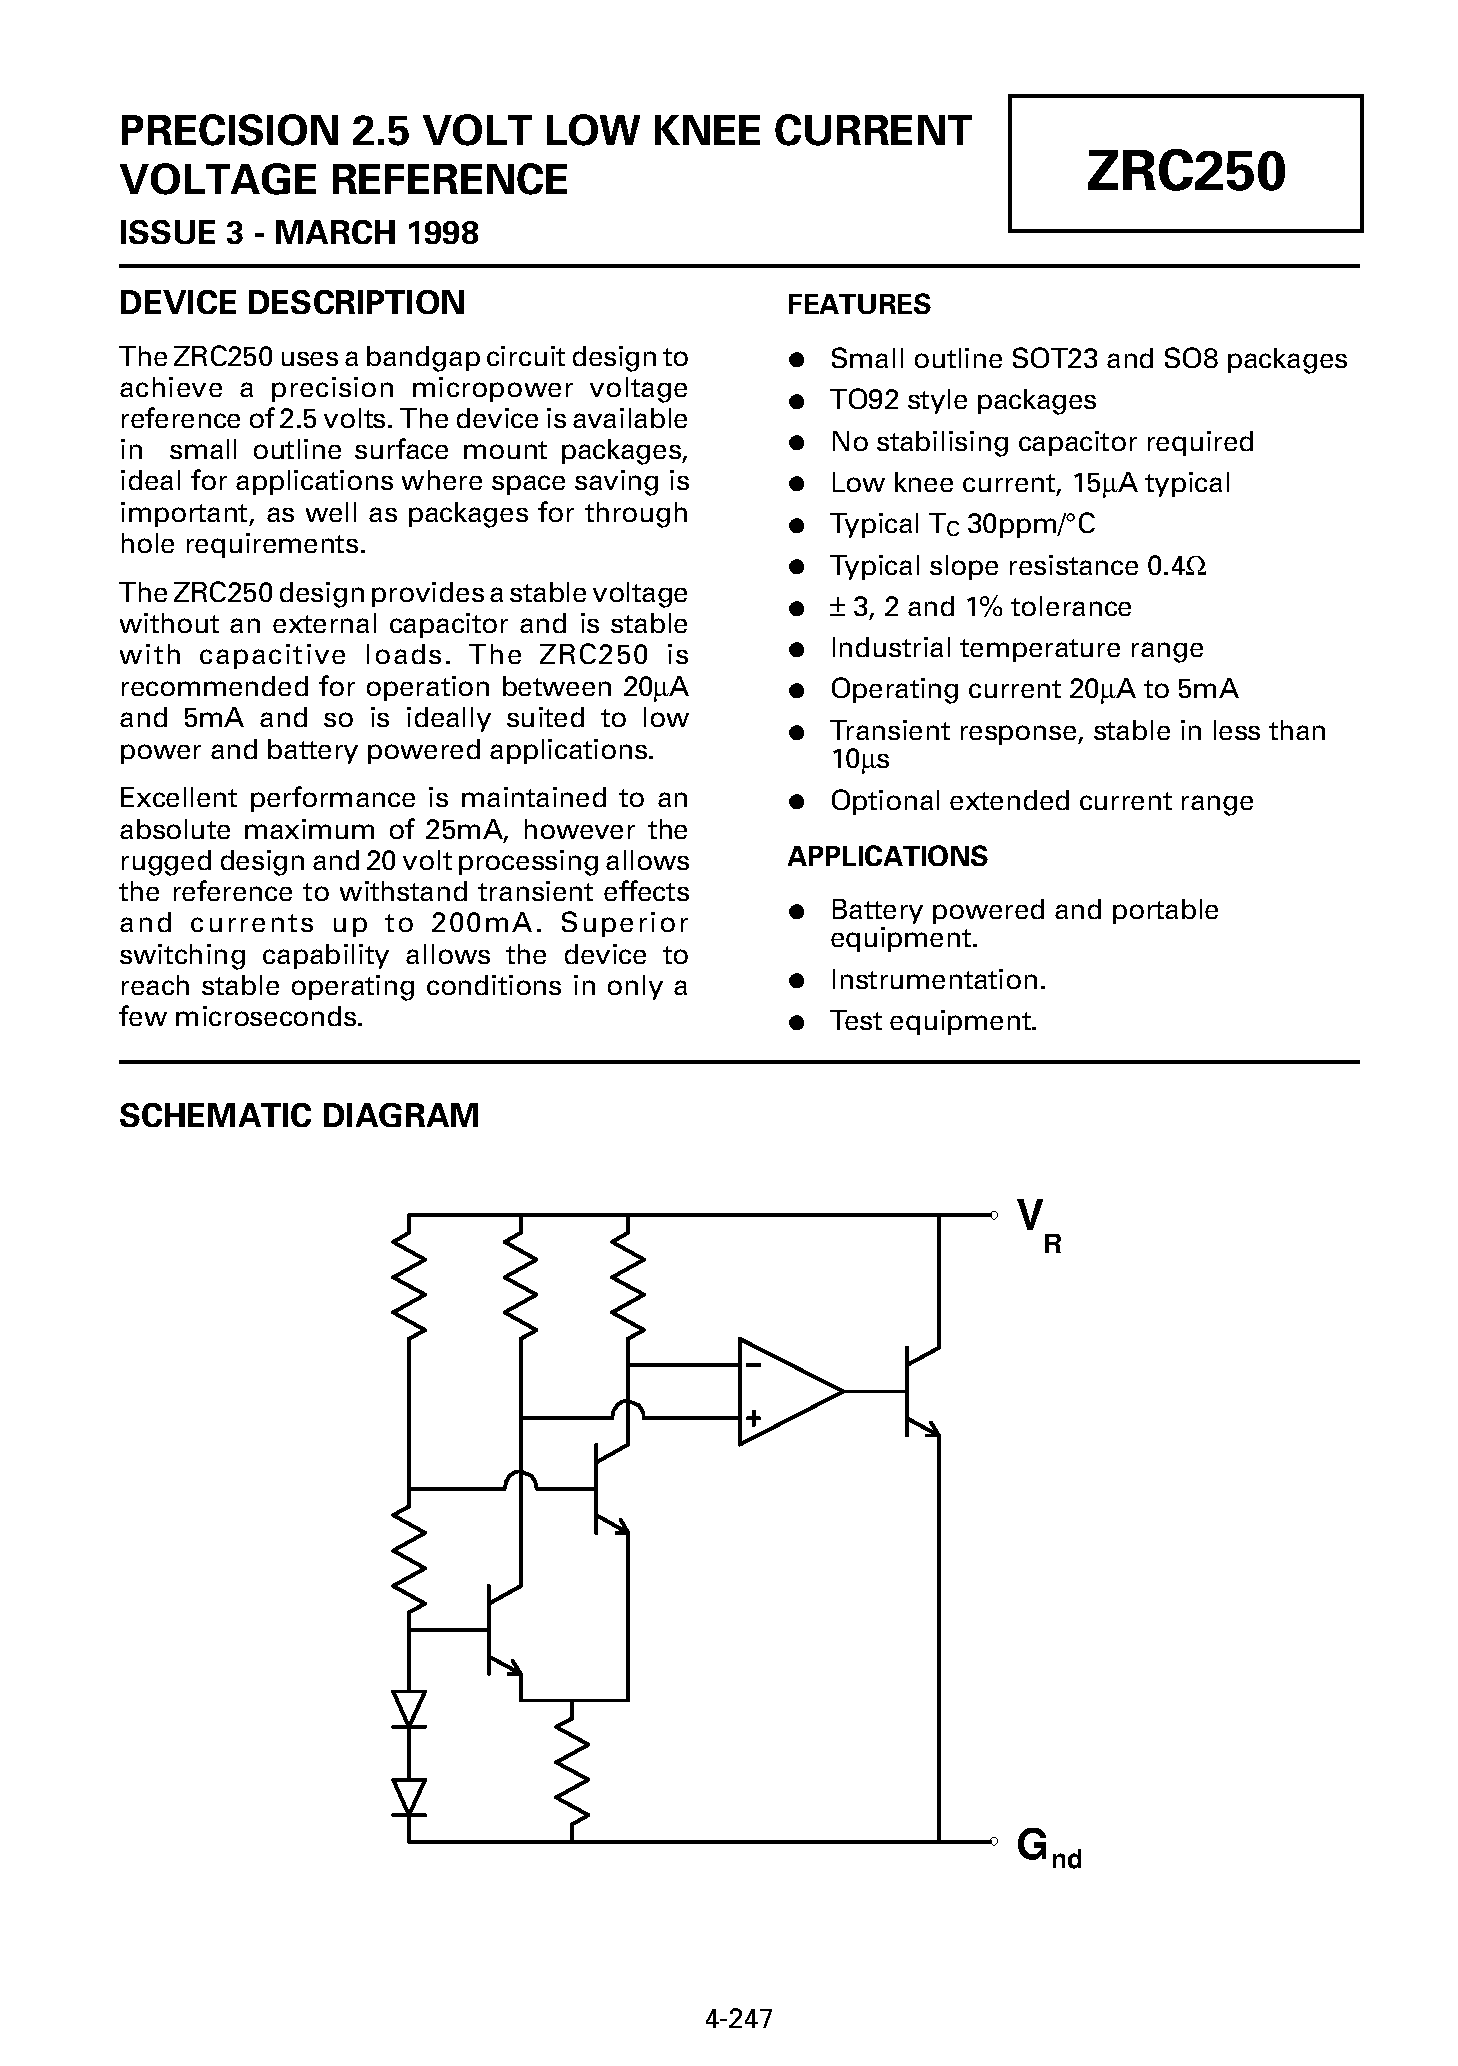 Datasheet ZRC250A02 - PRECISION 2.5 VOLT LOW KNEE CURRENT VOLTAGE REFERENCE page 1